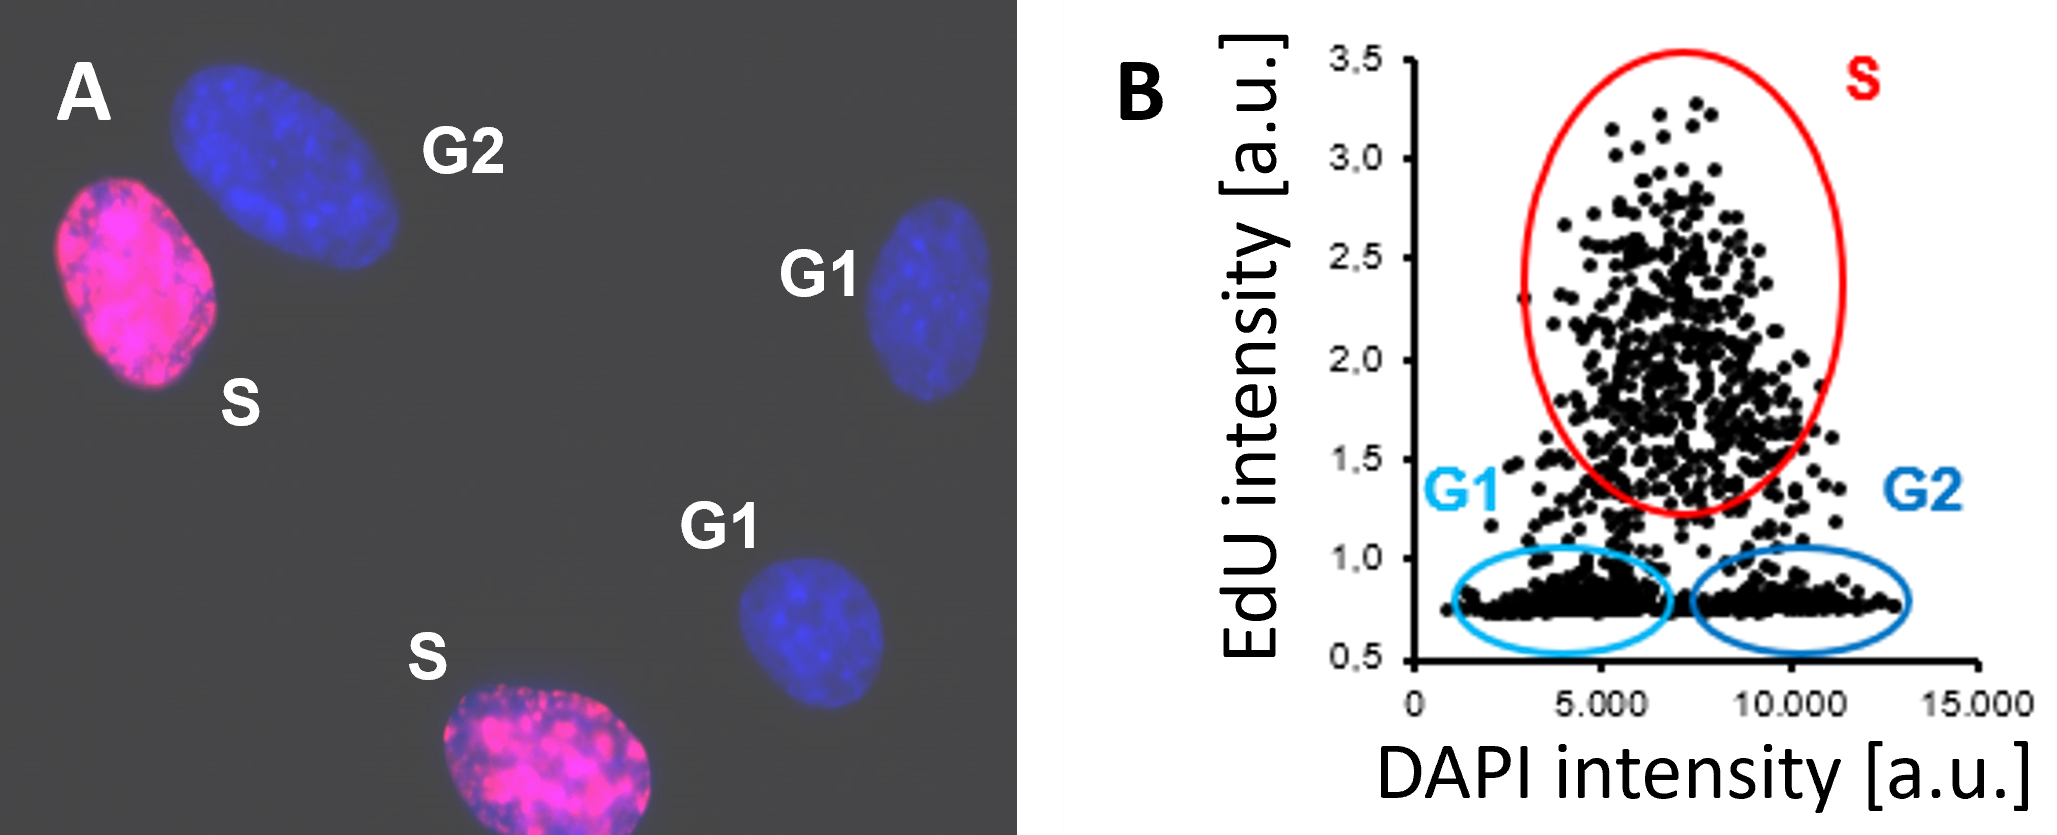 Representative fluorescence microscopy image. Red signal: EdU labelling; blue signal: DNA counterstaining with DAPI